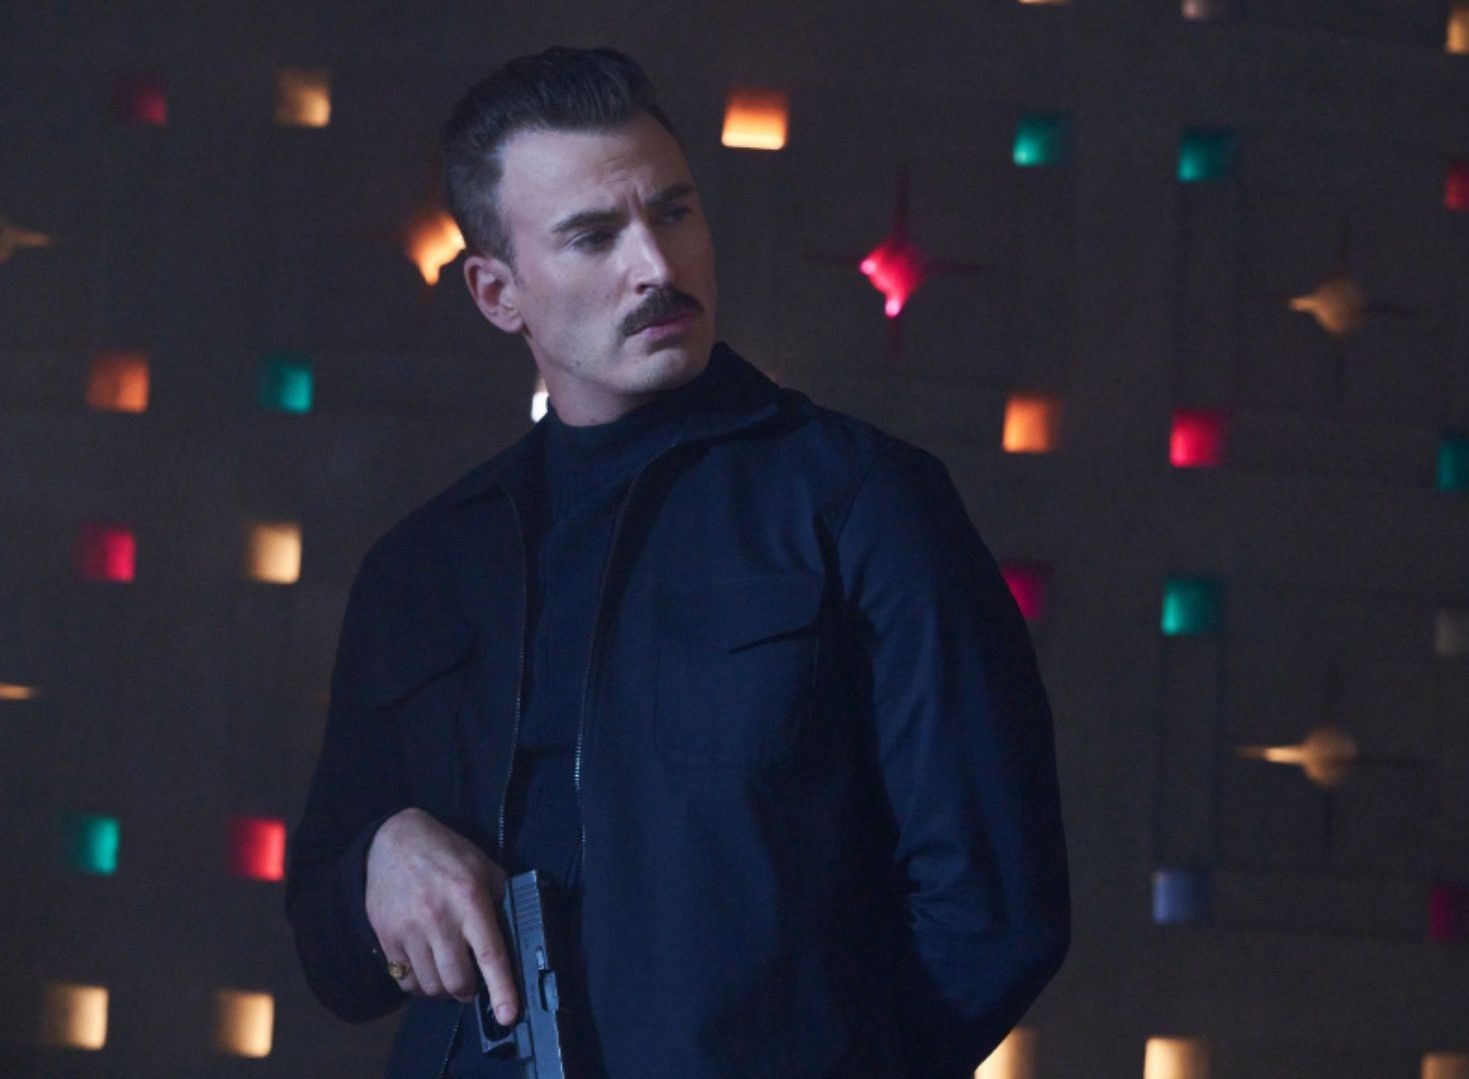 Chris Evans, Ryan Gosling face off in exclusive clip for Netflix's 'The Gray Man'